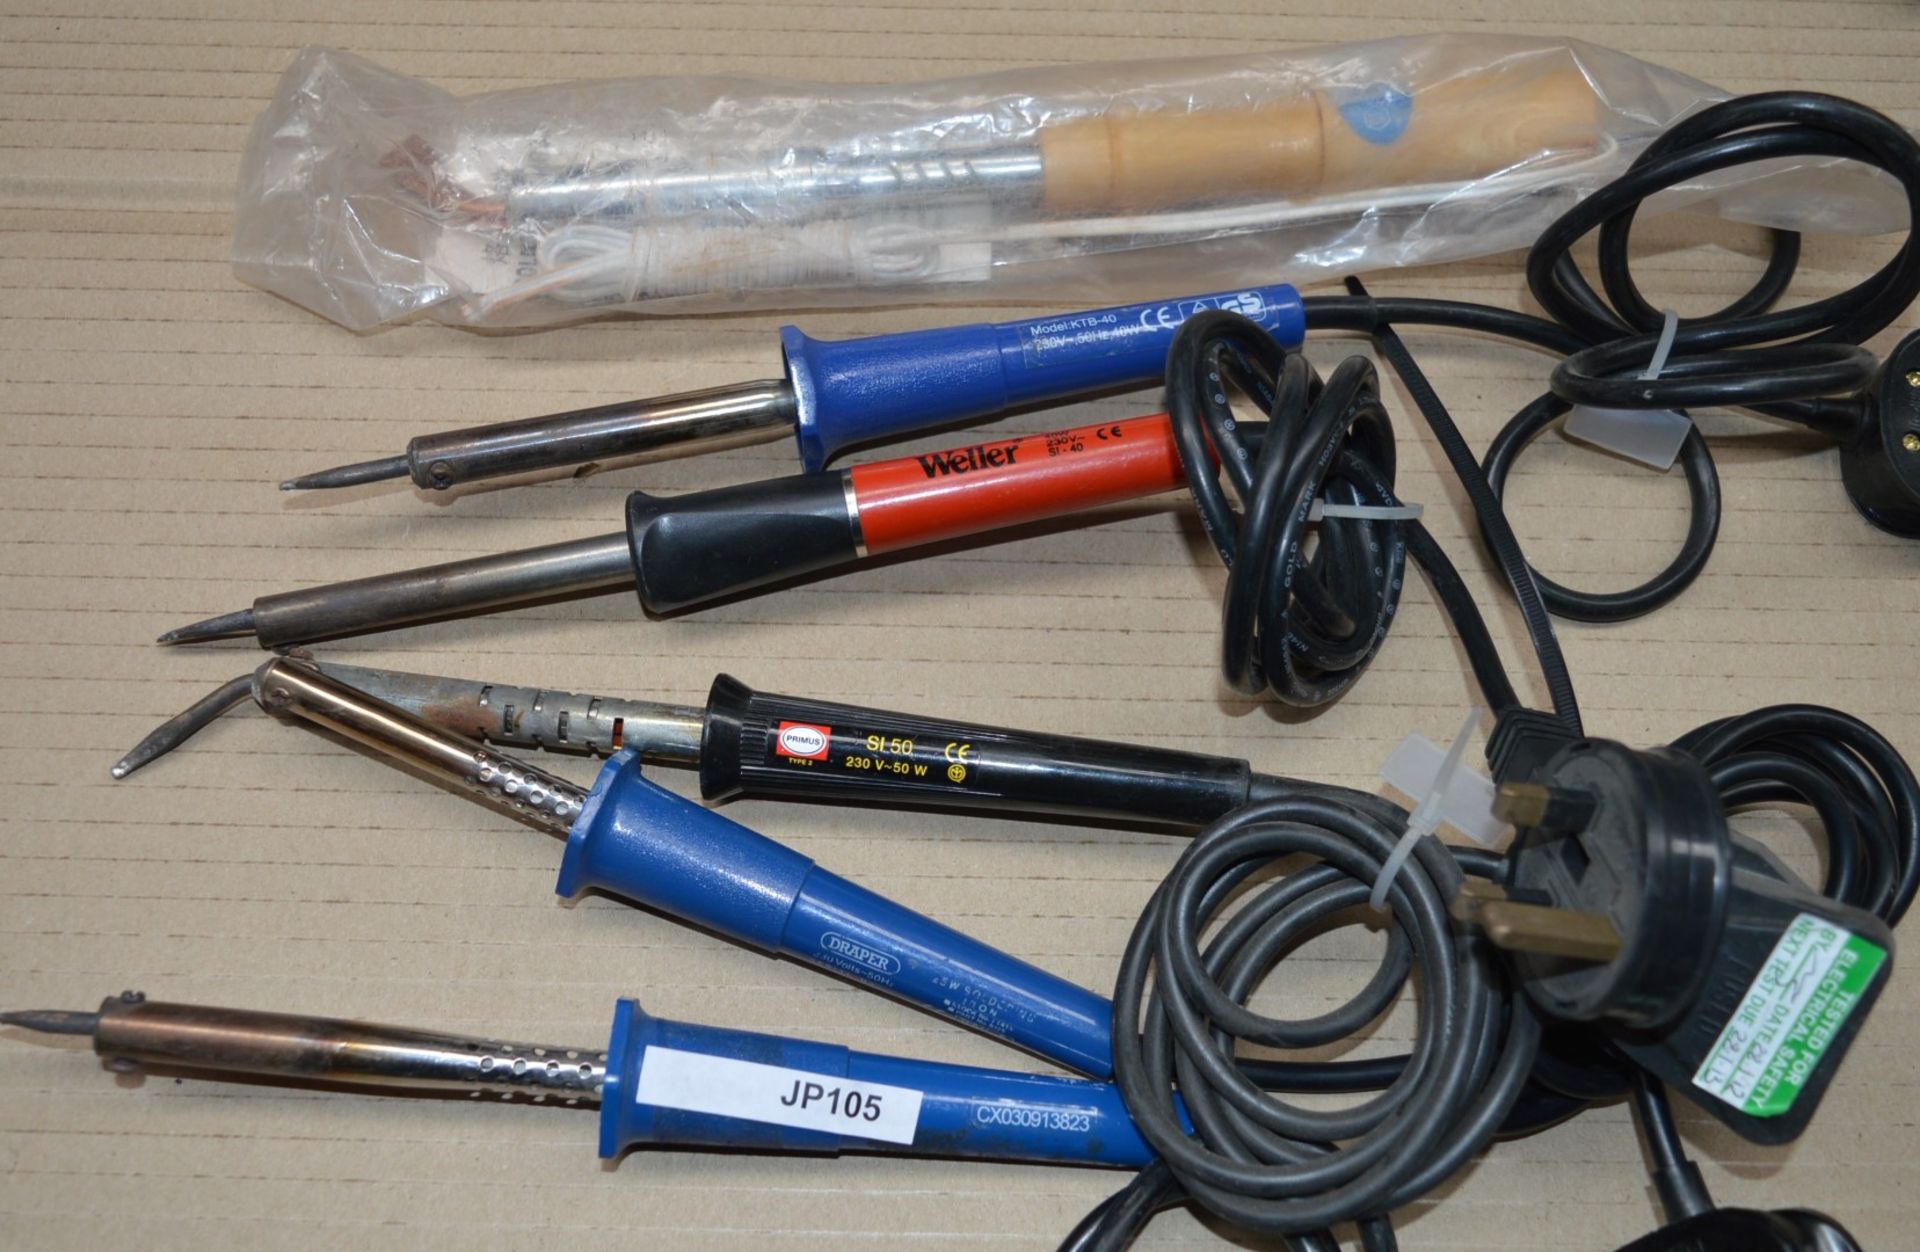 6 x Various 240v Soldering Irons - Brands Include Weller and Draper - CL300 - Ref JP105 - - Image 6 of 22